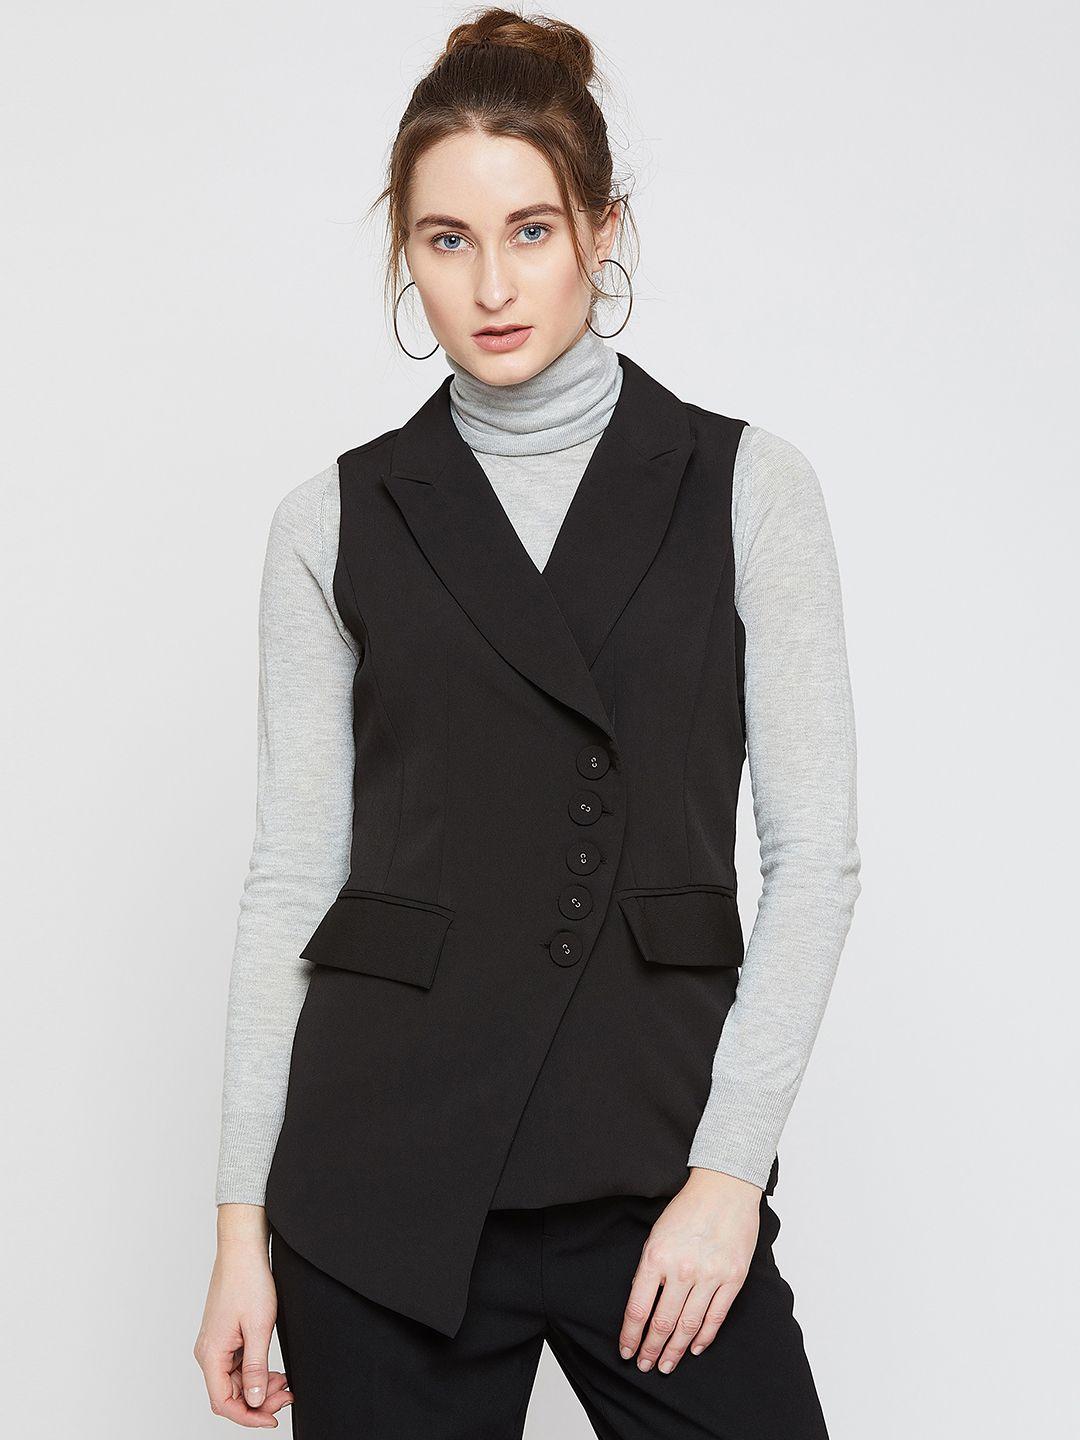 marie claire women black solid tailored jacket